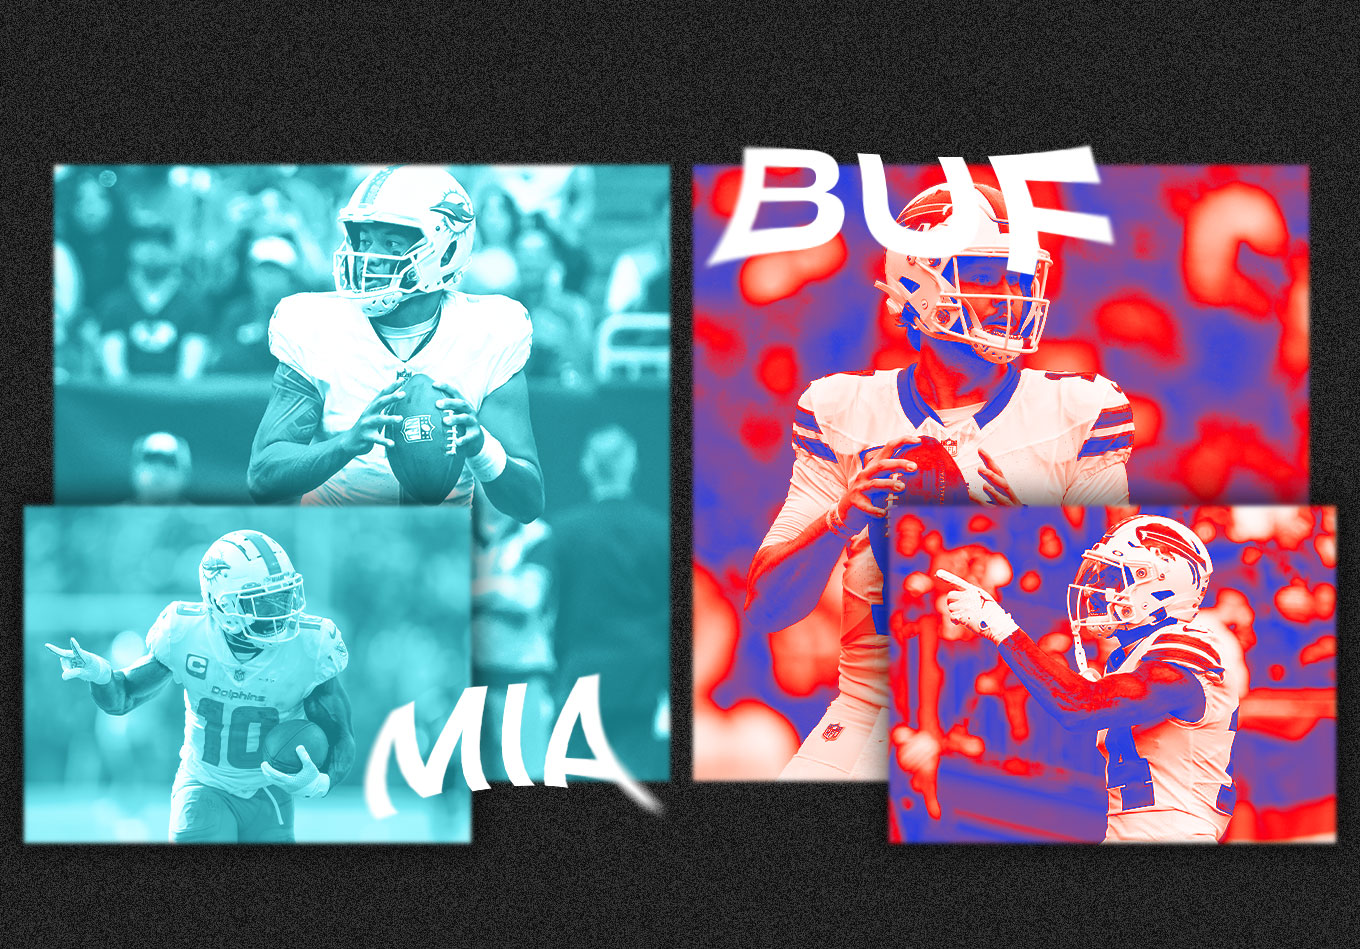 Dolphins vs Bills Prediction: Can Miami Unleash Another Offensive Outburst Against Buffalo’s Formidable Defense?